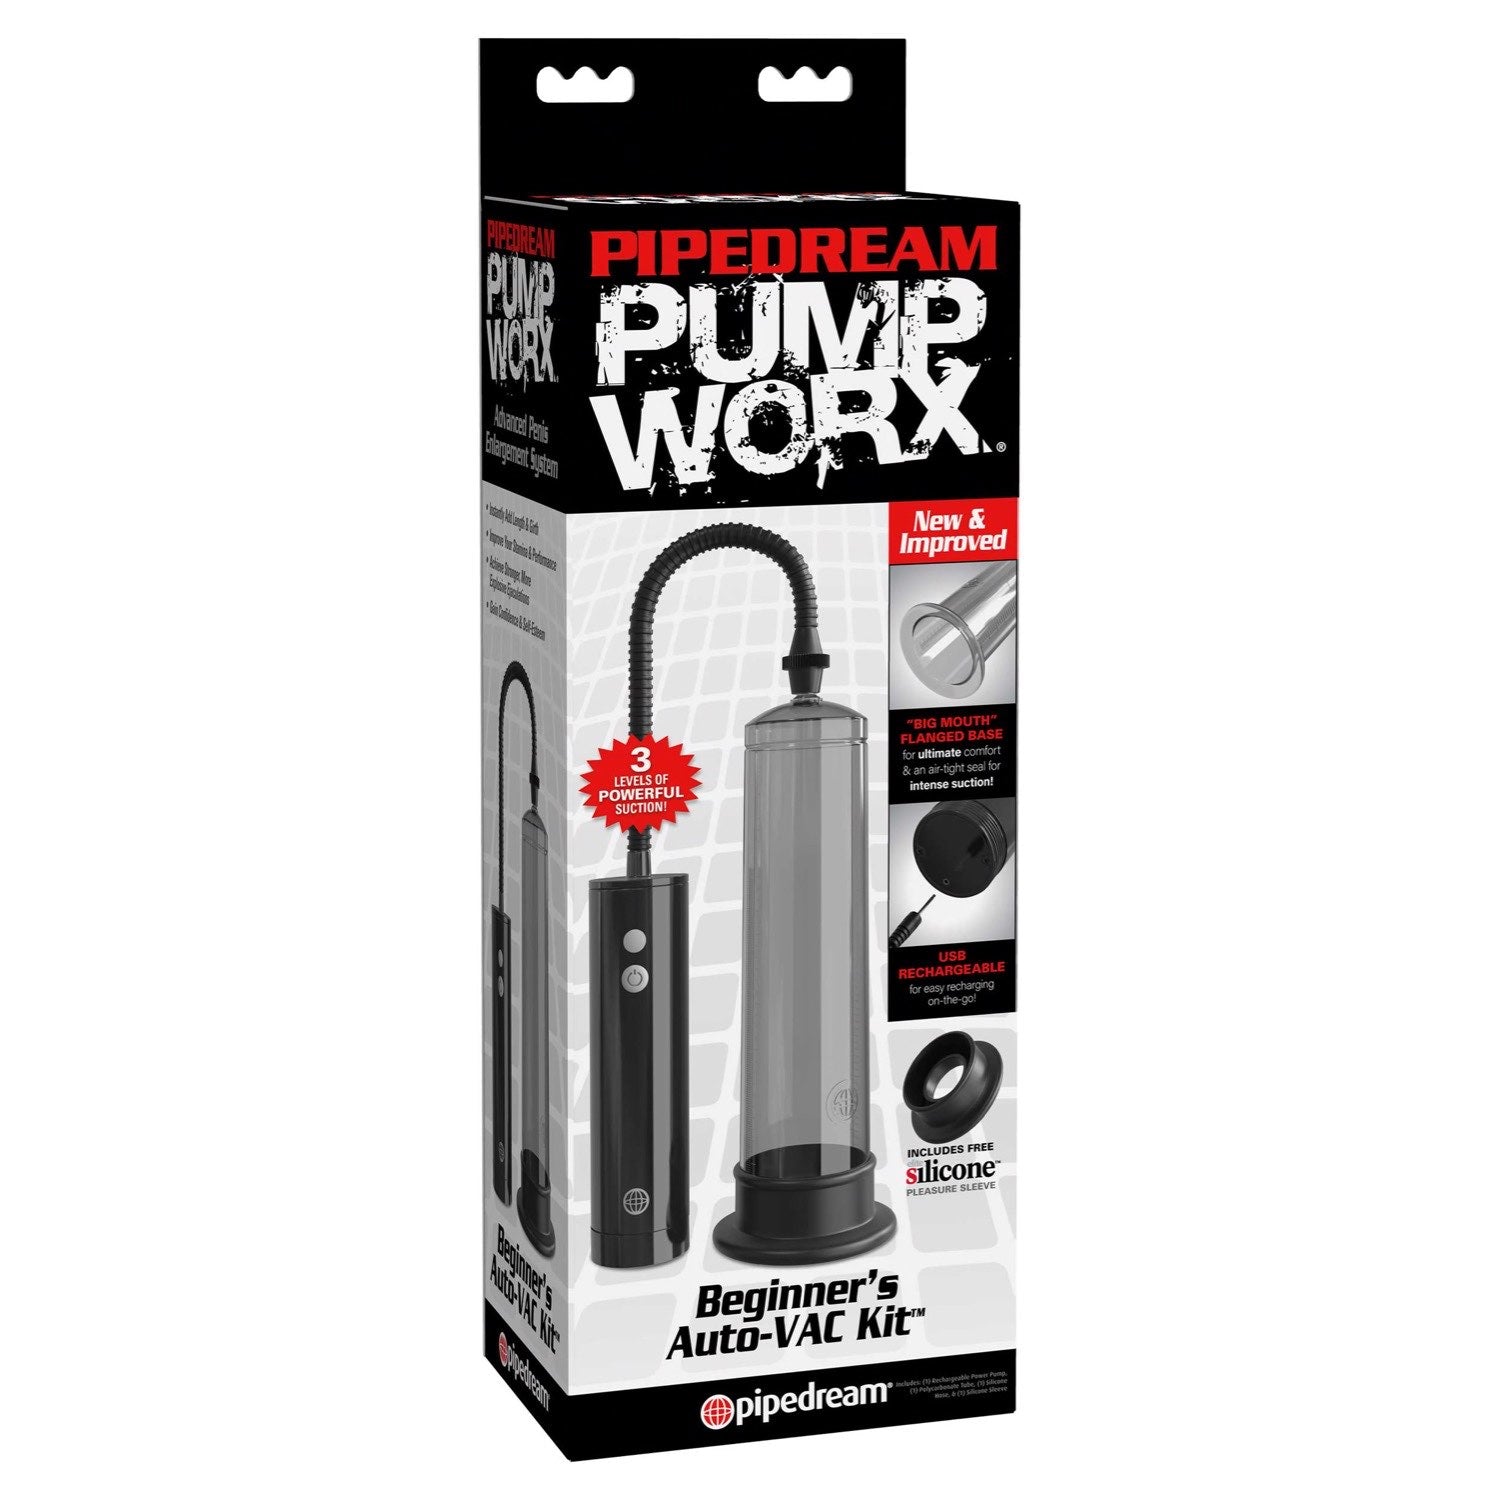 Pump Worx Beginner&#39;s Auto Vac Kit - Smoke Automatic Penis Pump by Pipedream